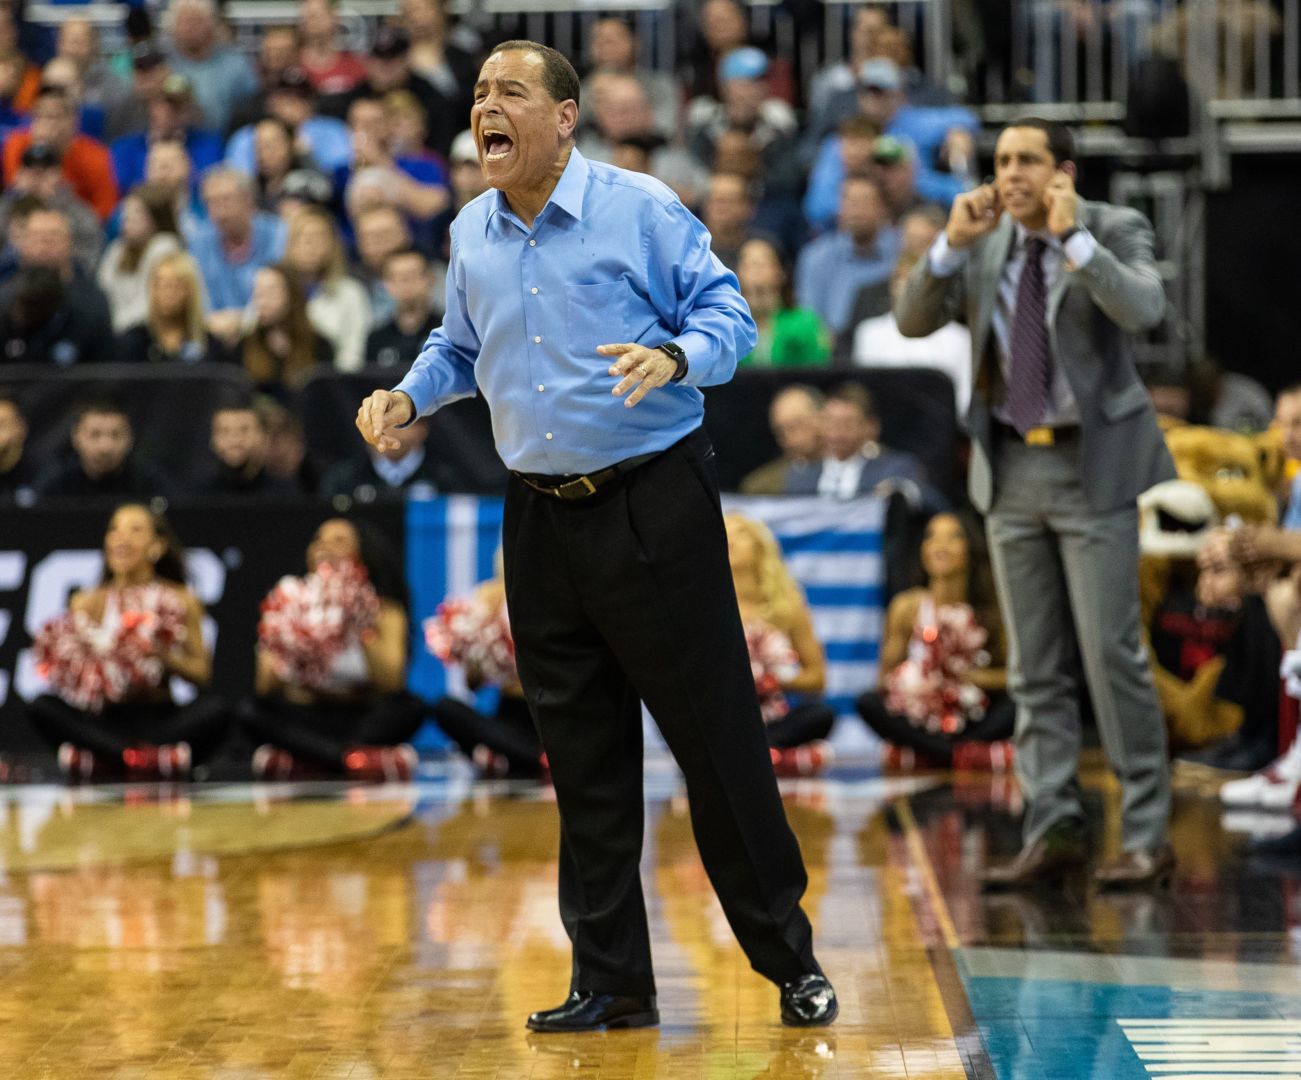 Head coach Kelvin Sampson did not hold back his frustration after Houston's loss to Oklahoma State on Sunday at Feritta Center, saying afterwards, "we disrespected our program." | File photo